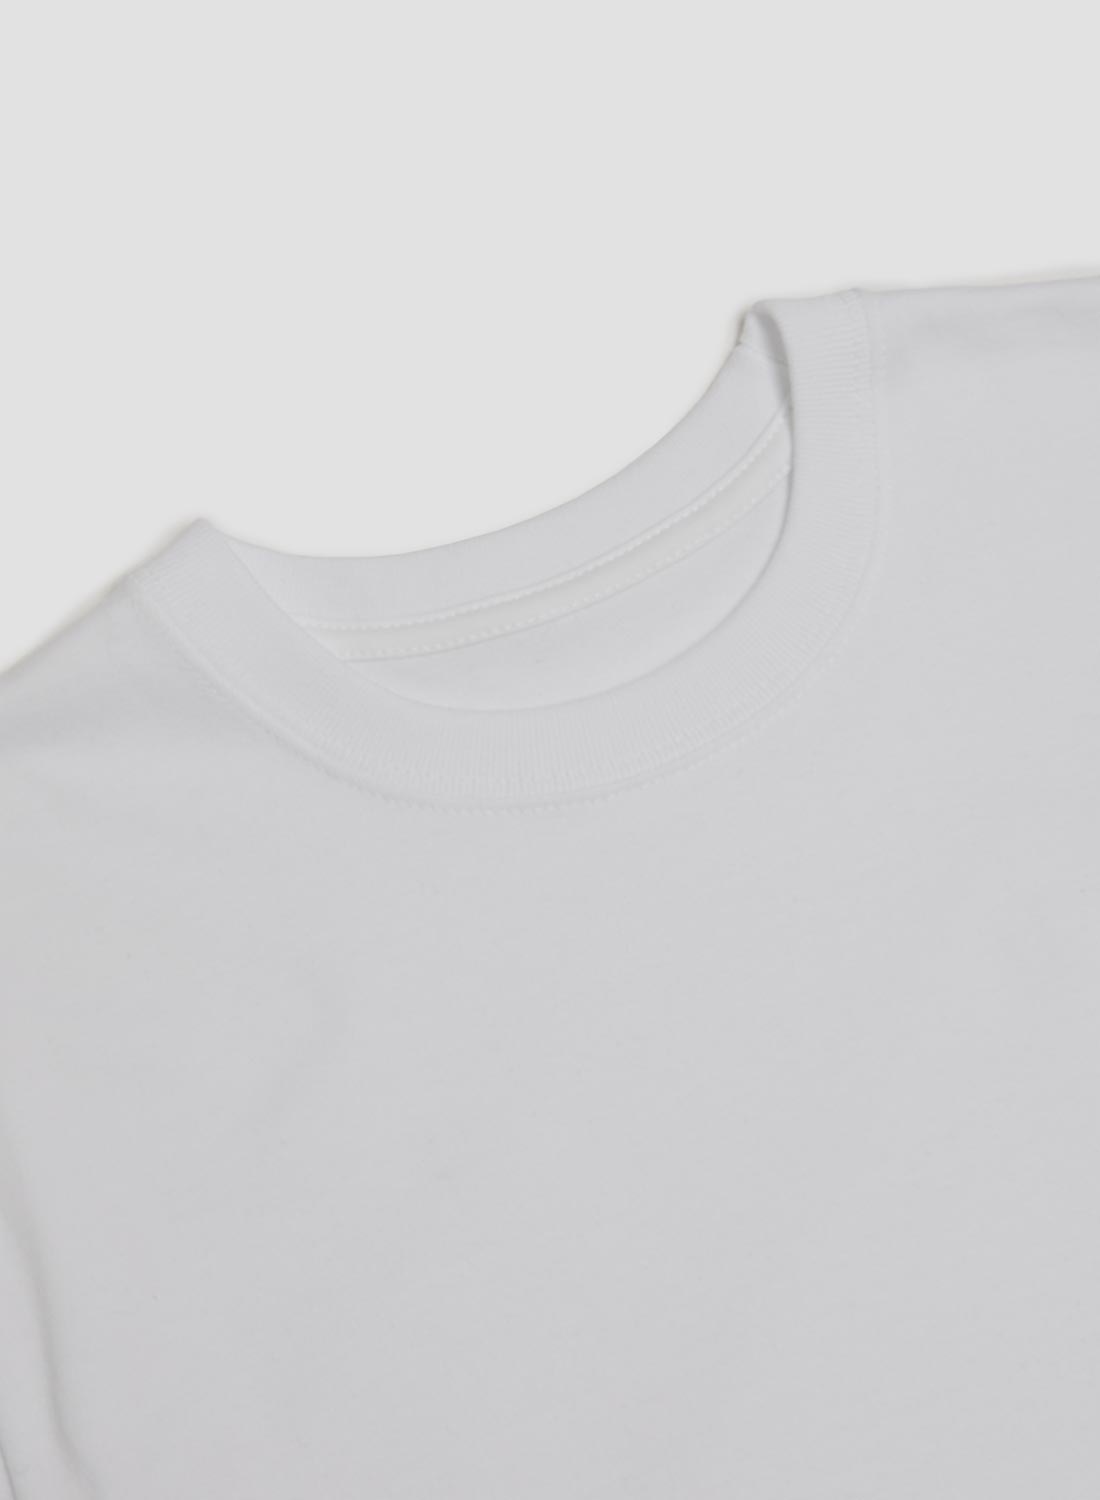 Heavy Duty Athletic T-Shirt in White - 2